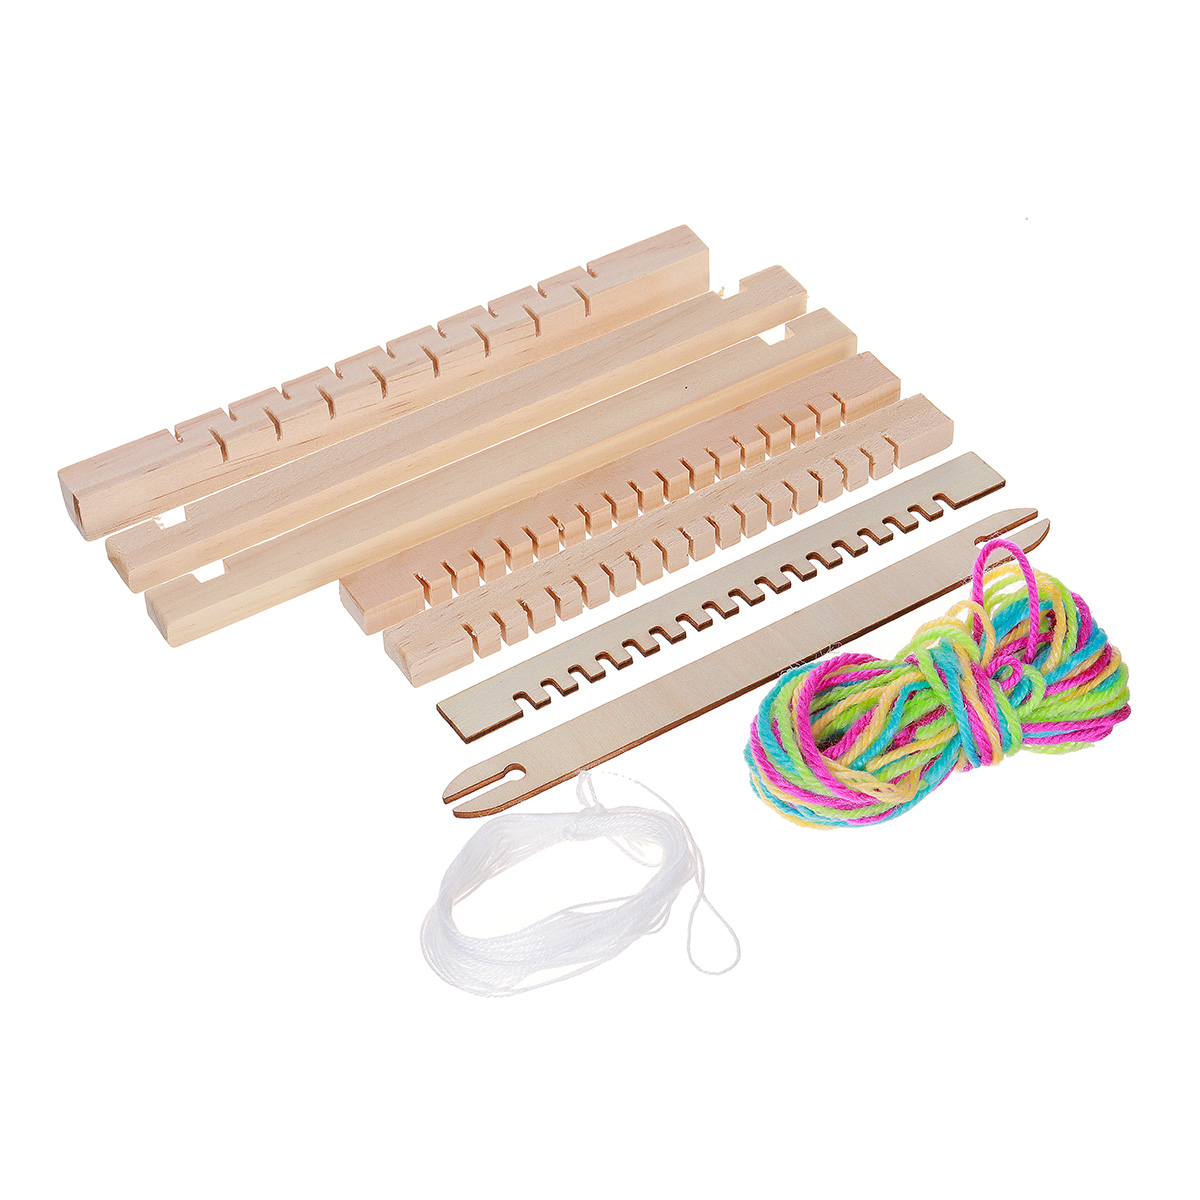 DIY-Knitting-Beginner-Mini-Sewing-Tool-is-Easy-to-Assemble-and-Simple-Manual-Knitting-Machine-1909996-2